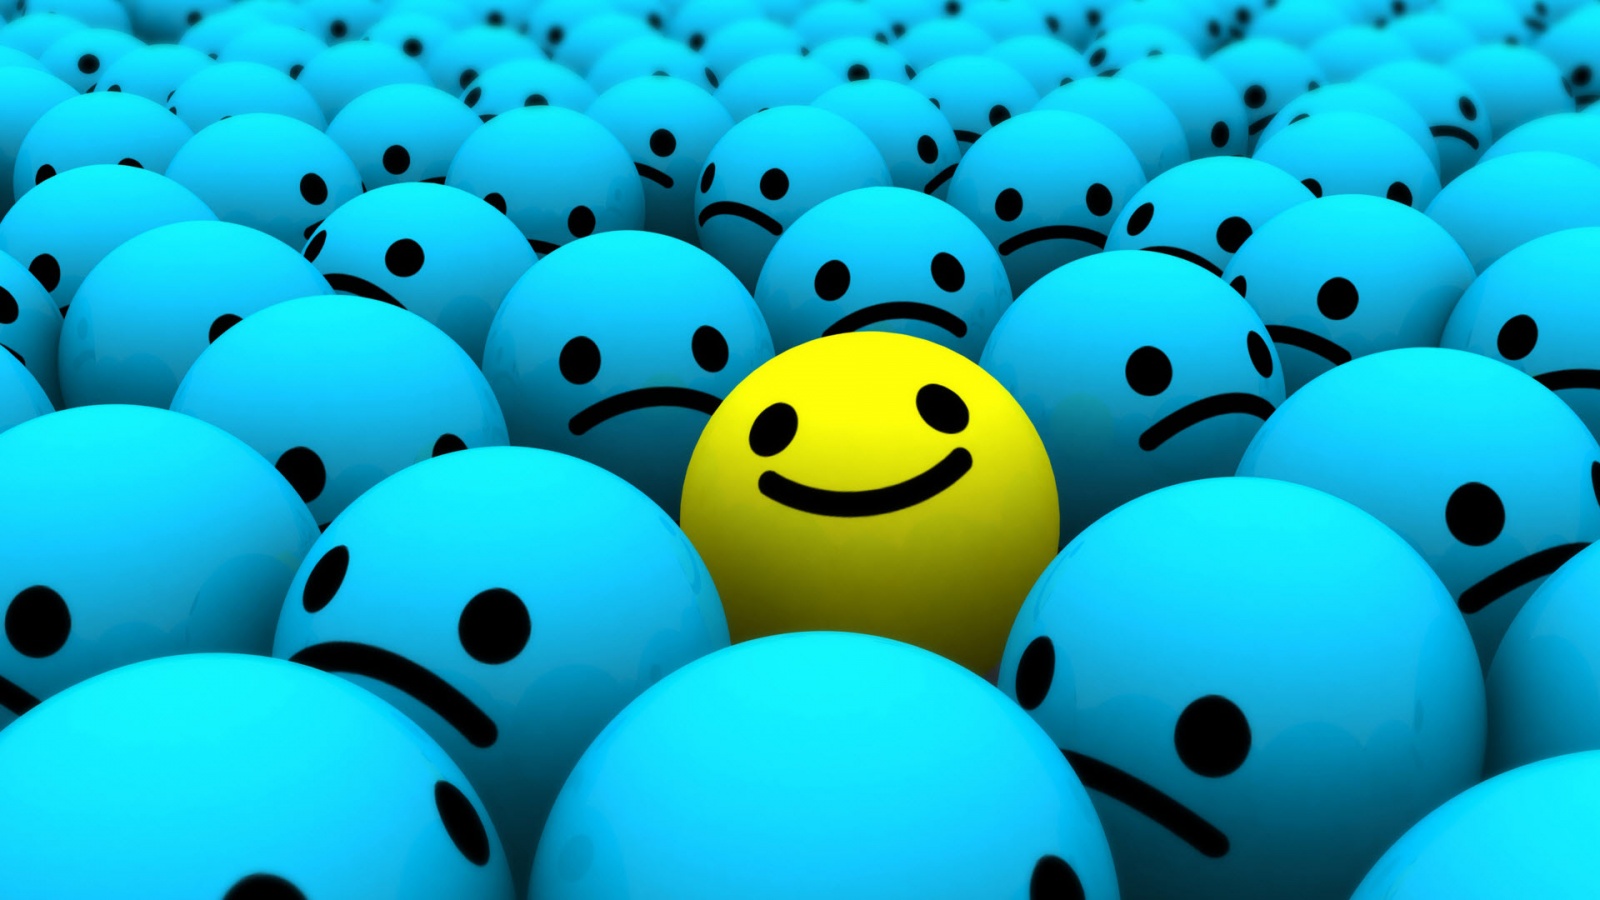 Smiley Faces Image Smile HD Wallpaper And Background Photos